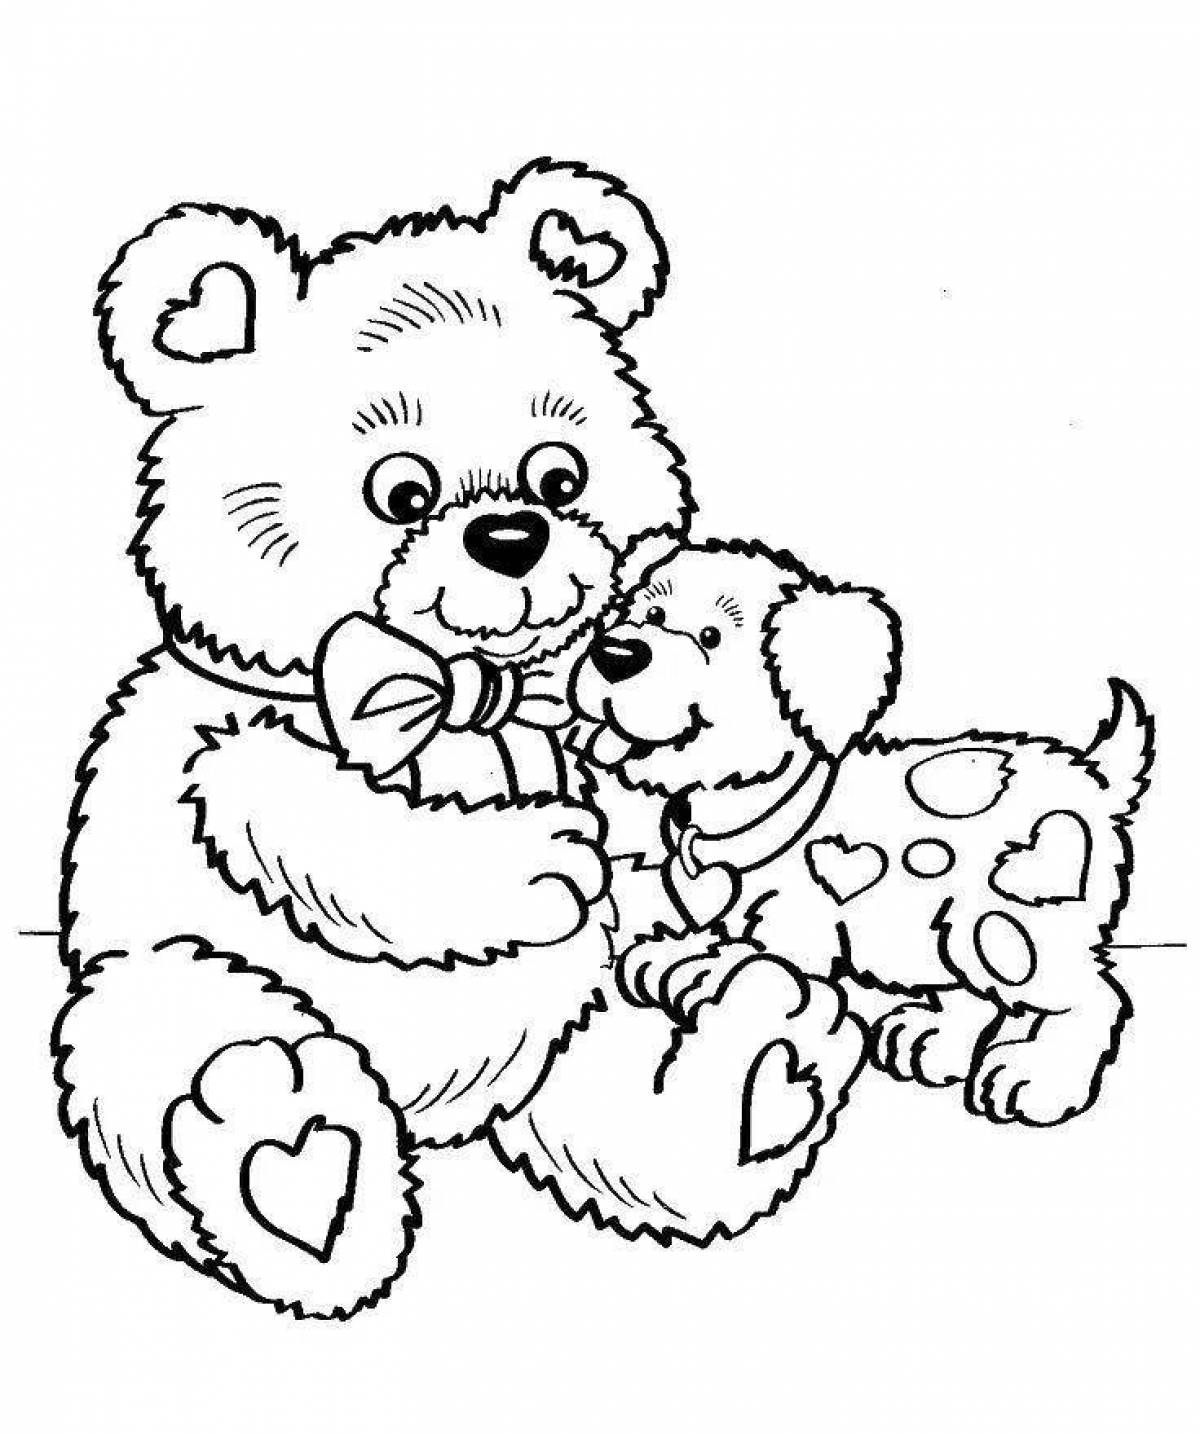 Fluffy teddy bear coloring book for kids